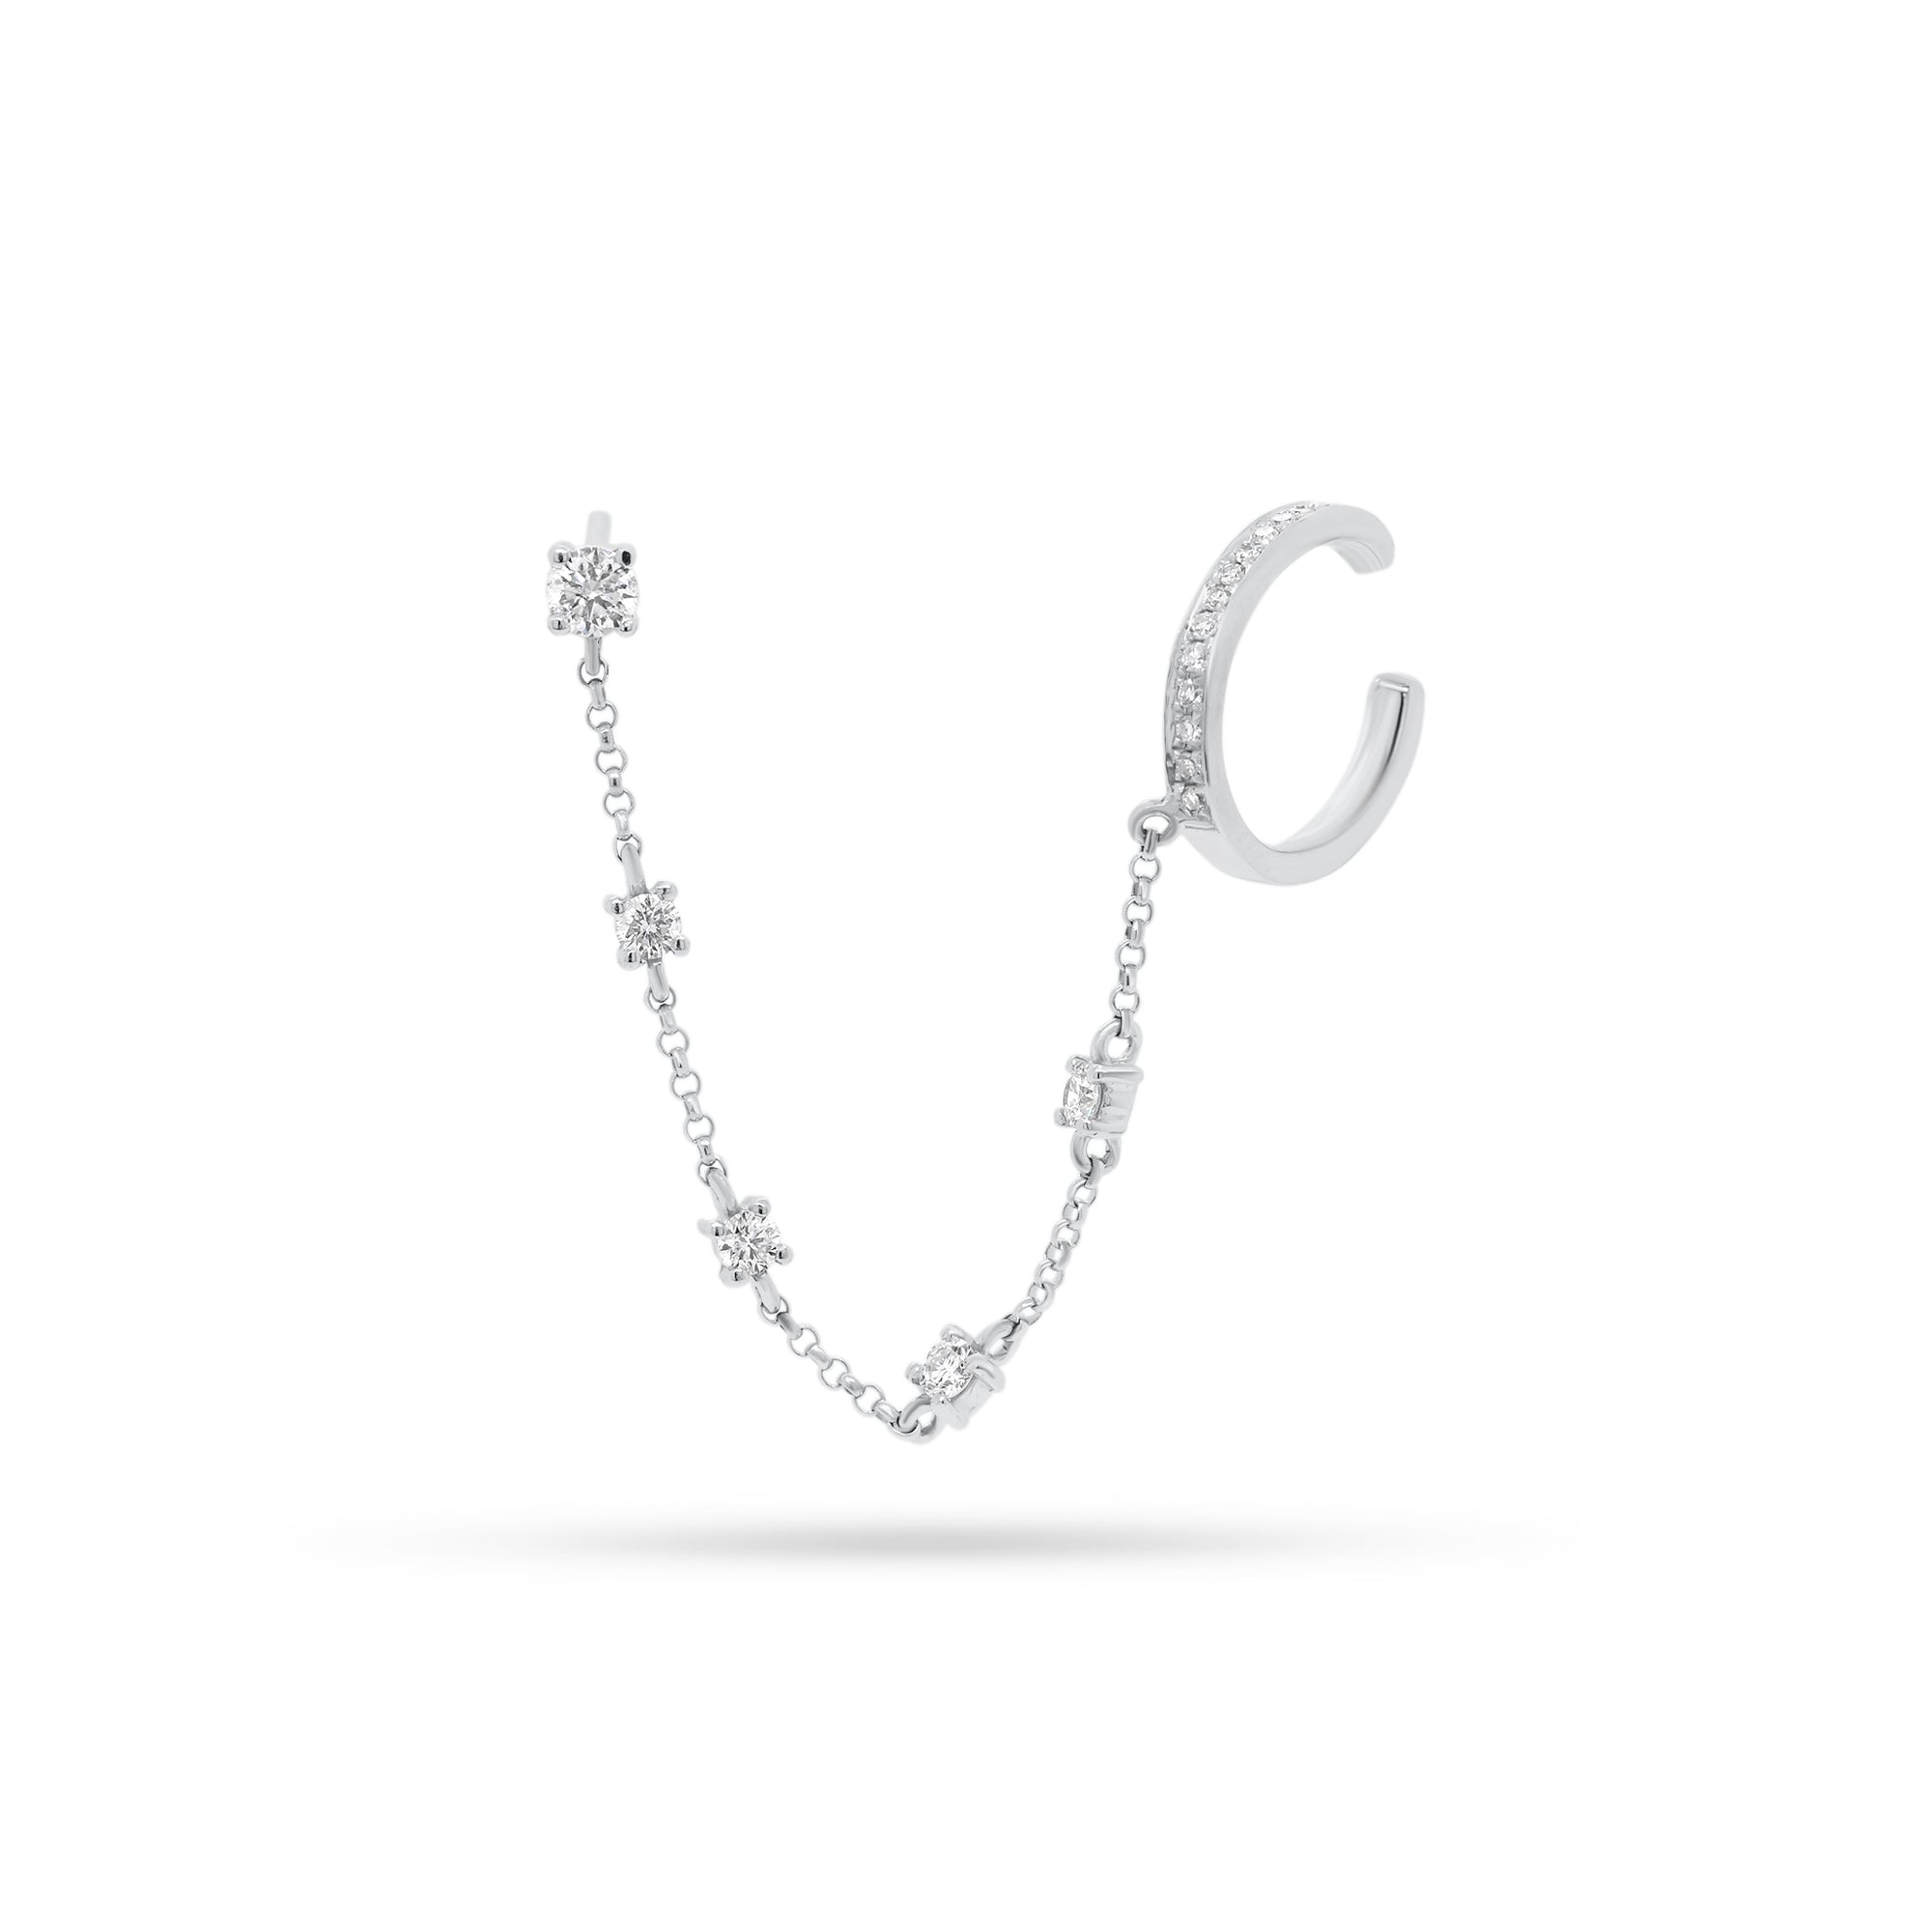 Diamond Ear Cuff with Diamond Chain & Stud - 14K white gold weighing 1.40 grams - 21 round diamonds totaling 0.26 carats.